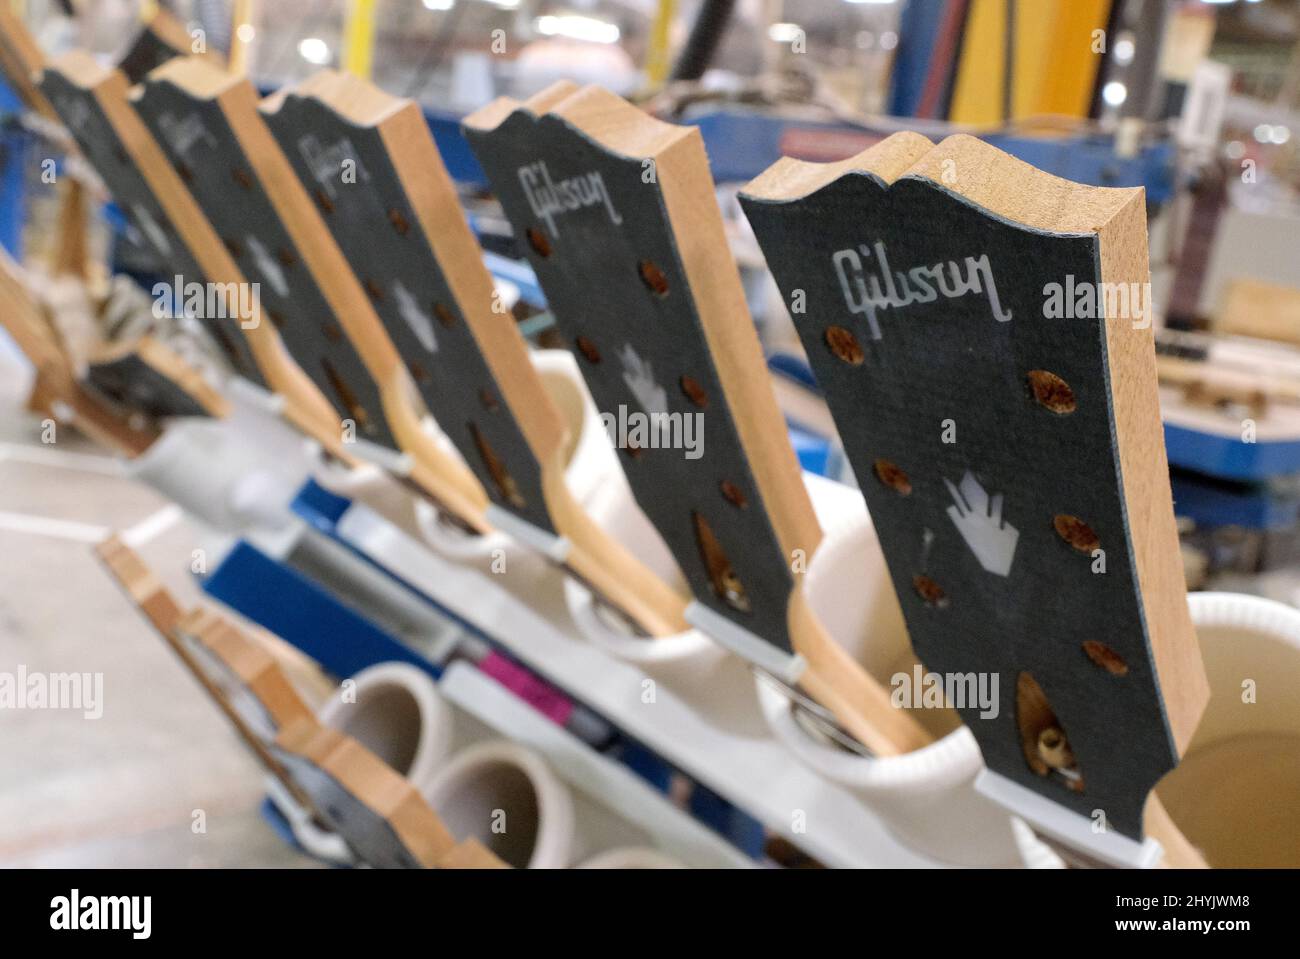 Tour of the Gibson USA Factory on July 17, 2019 in Nashville. Stock Photo